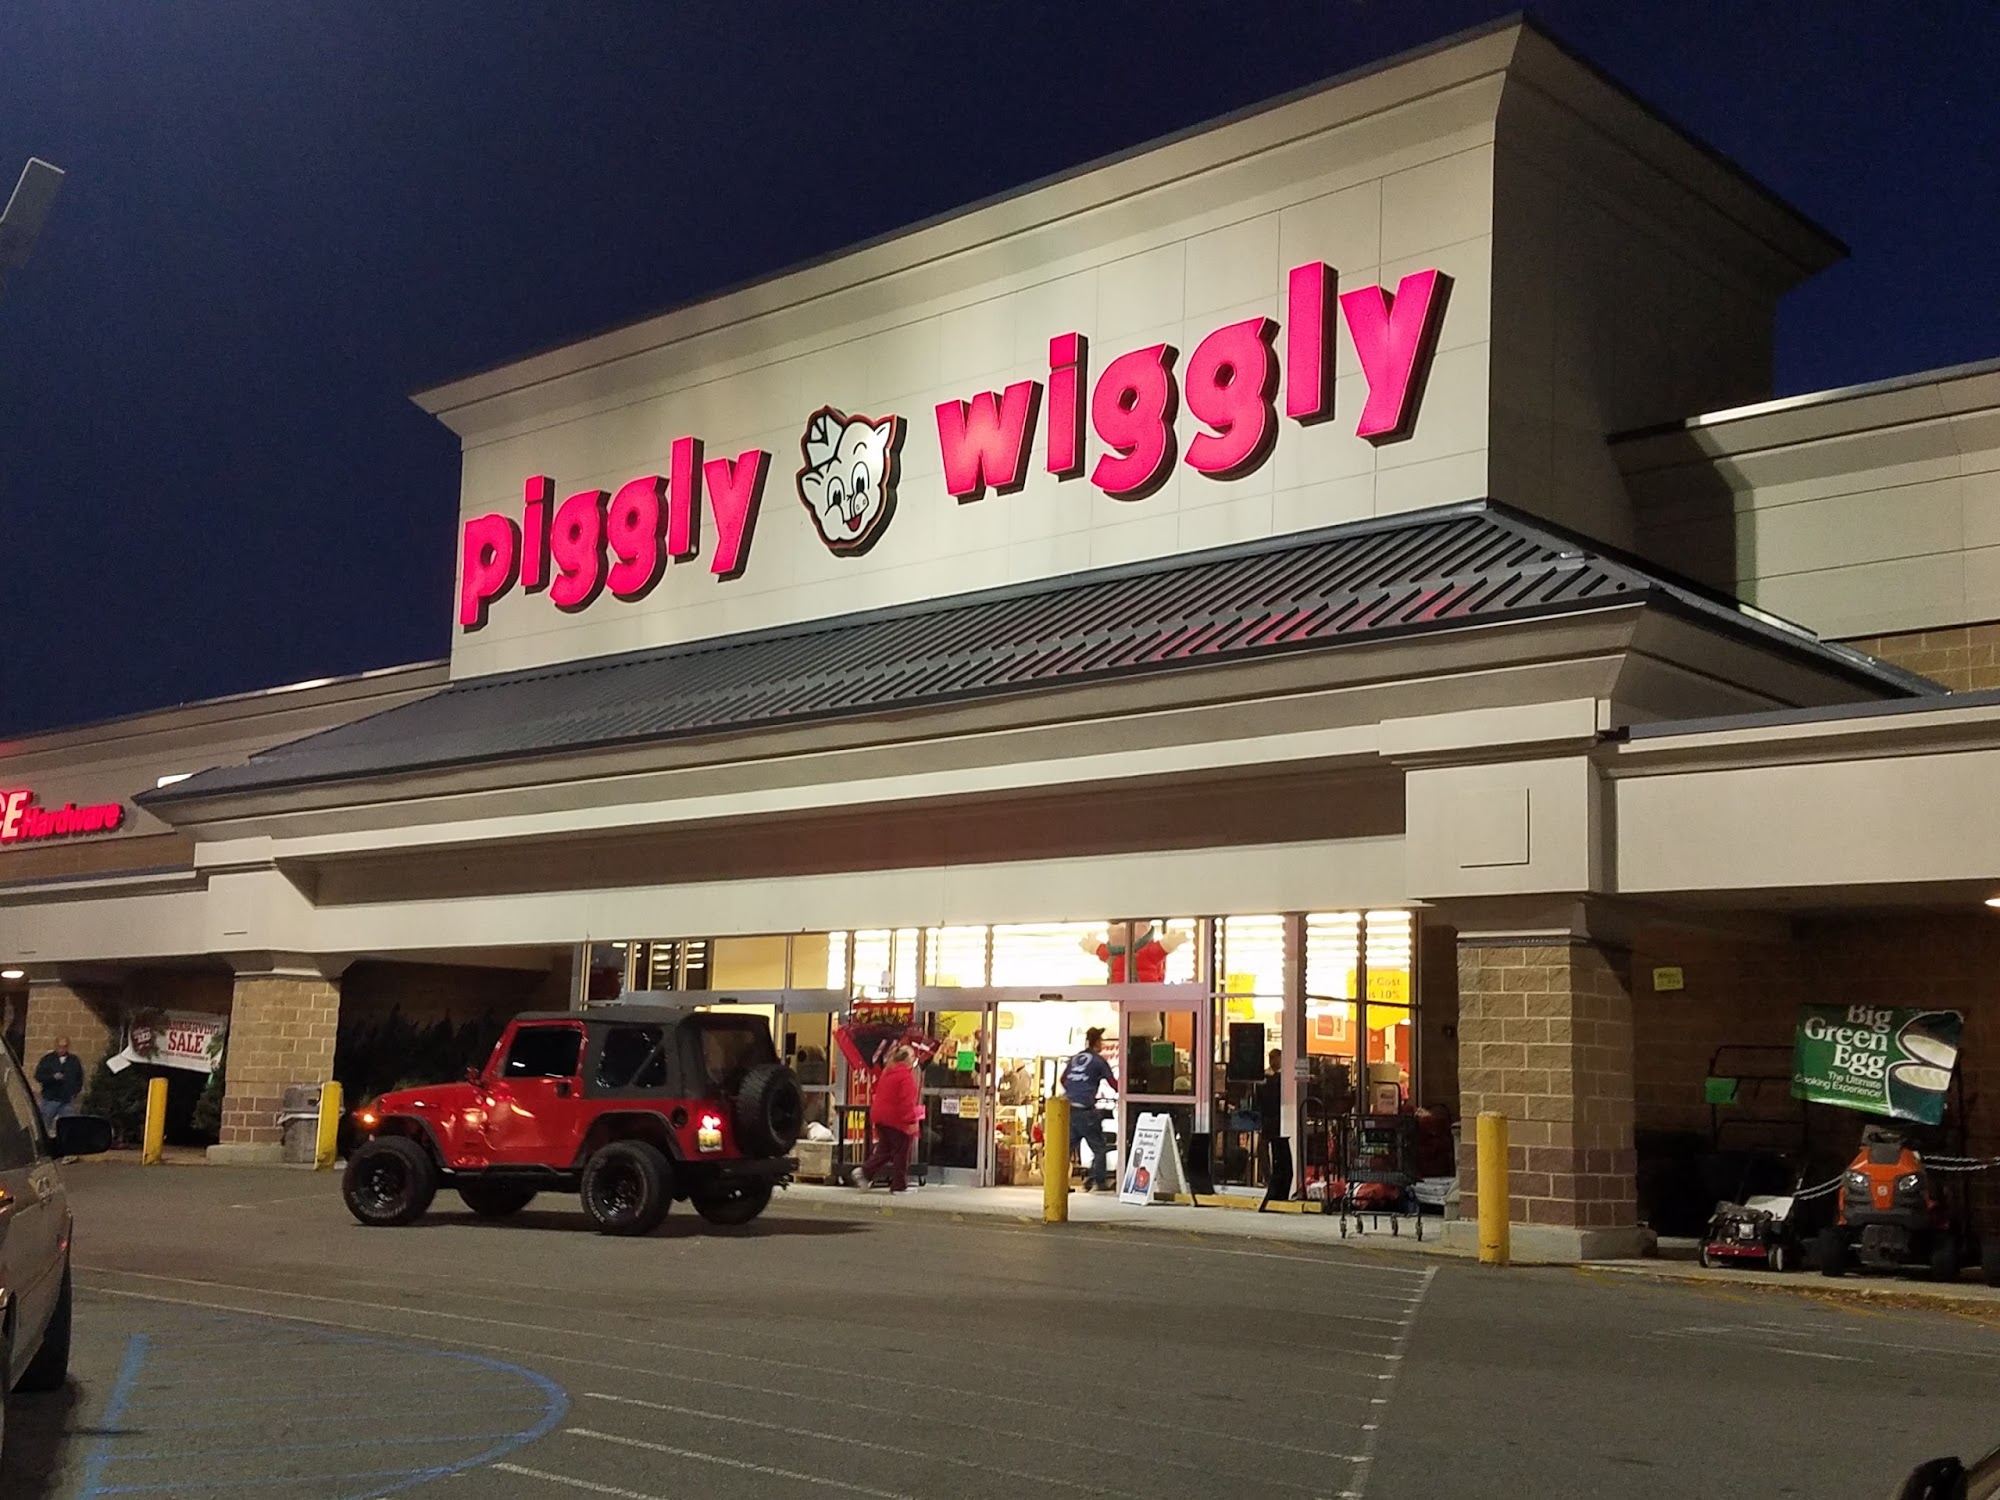 Piggly Wiggly Pinson